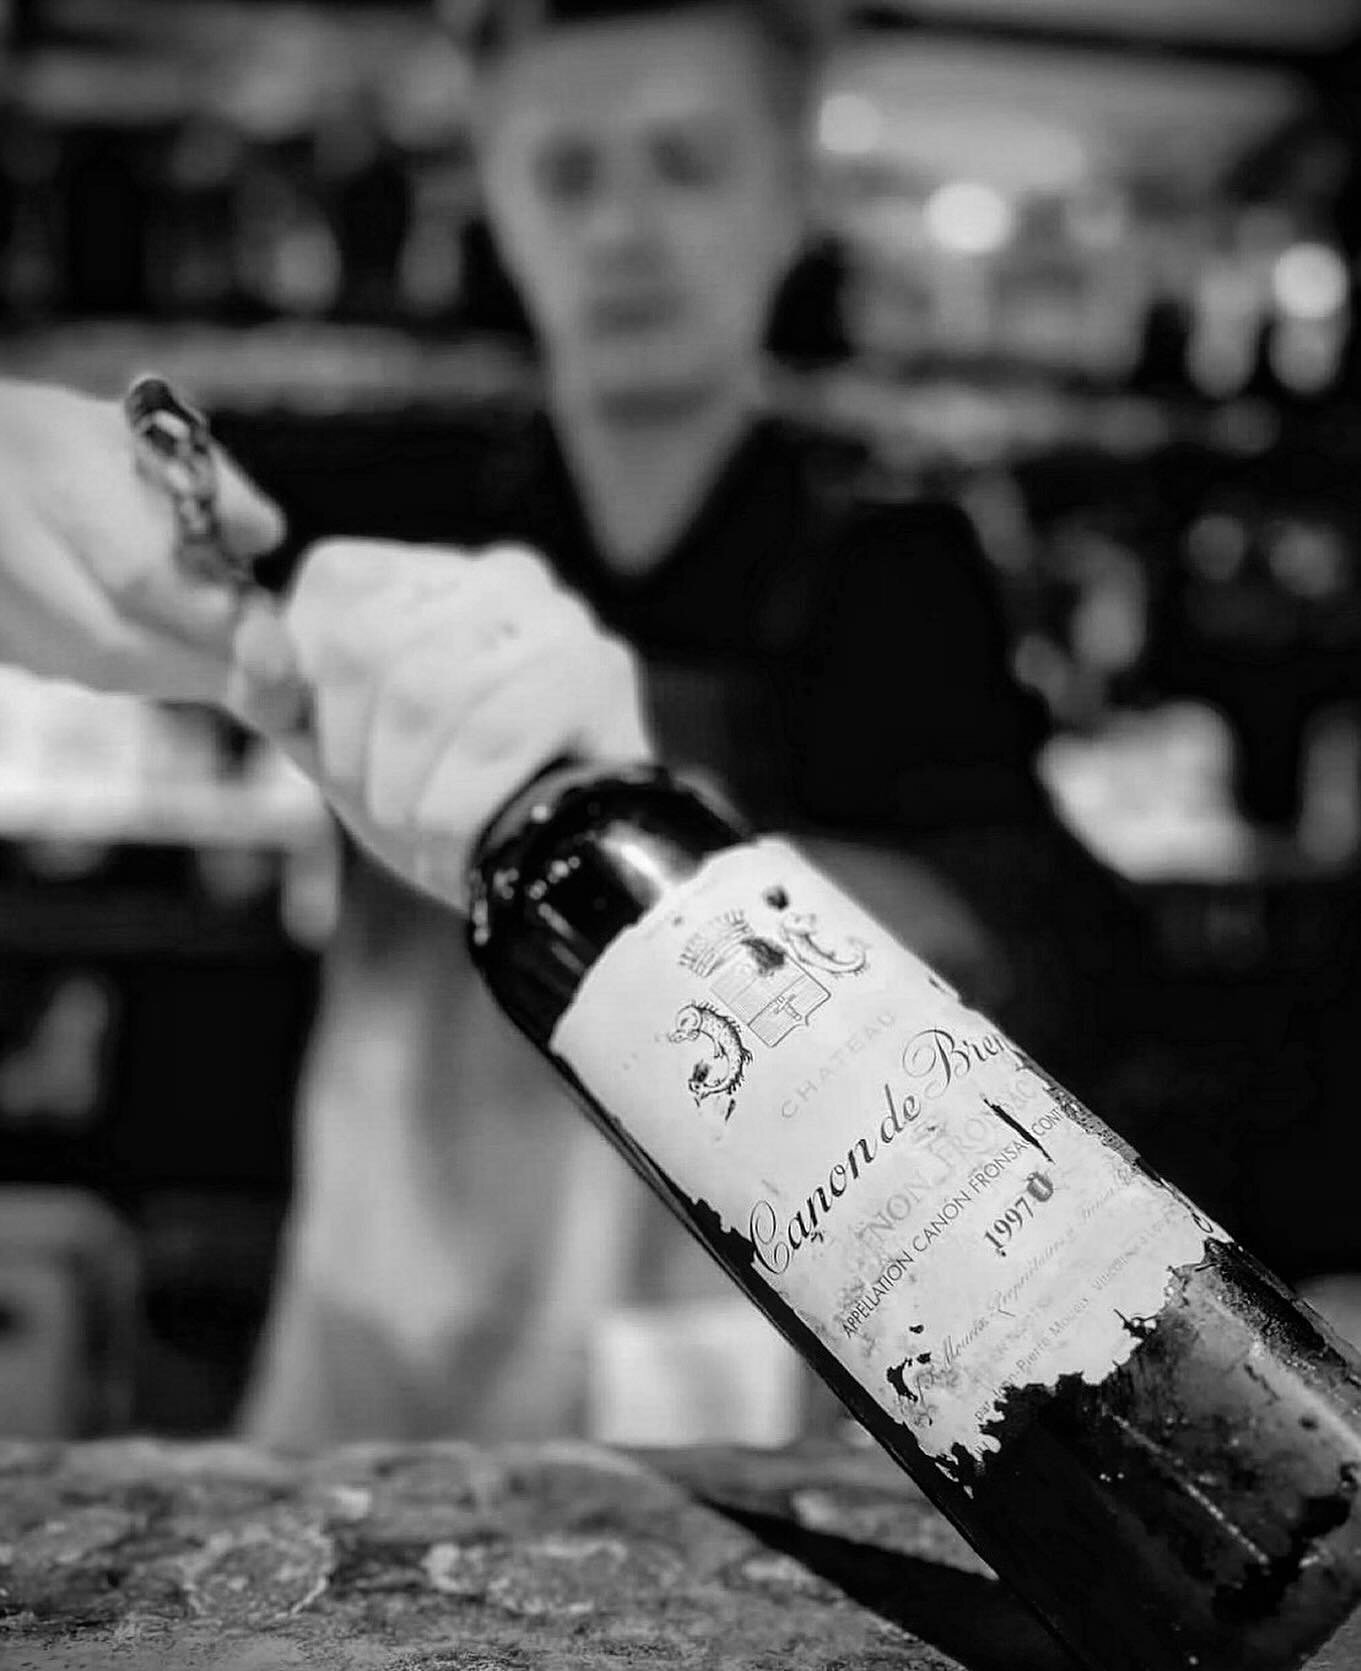 Fine wine in the fine city &bull; 

We like to open the good stuff now and then! Our bartenders give excellent wine pairings with your choice of dishes. 

We&rsquo;re open for another week of service from tomorrow evening. To book a table with us, vi